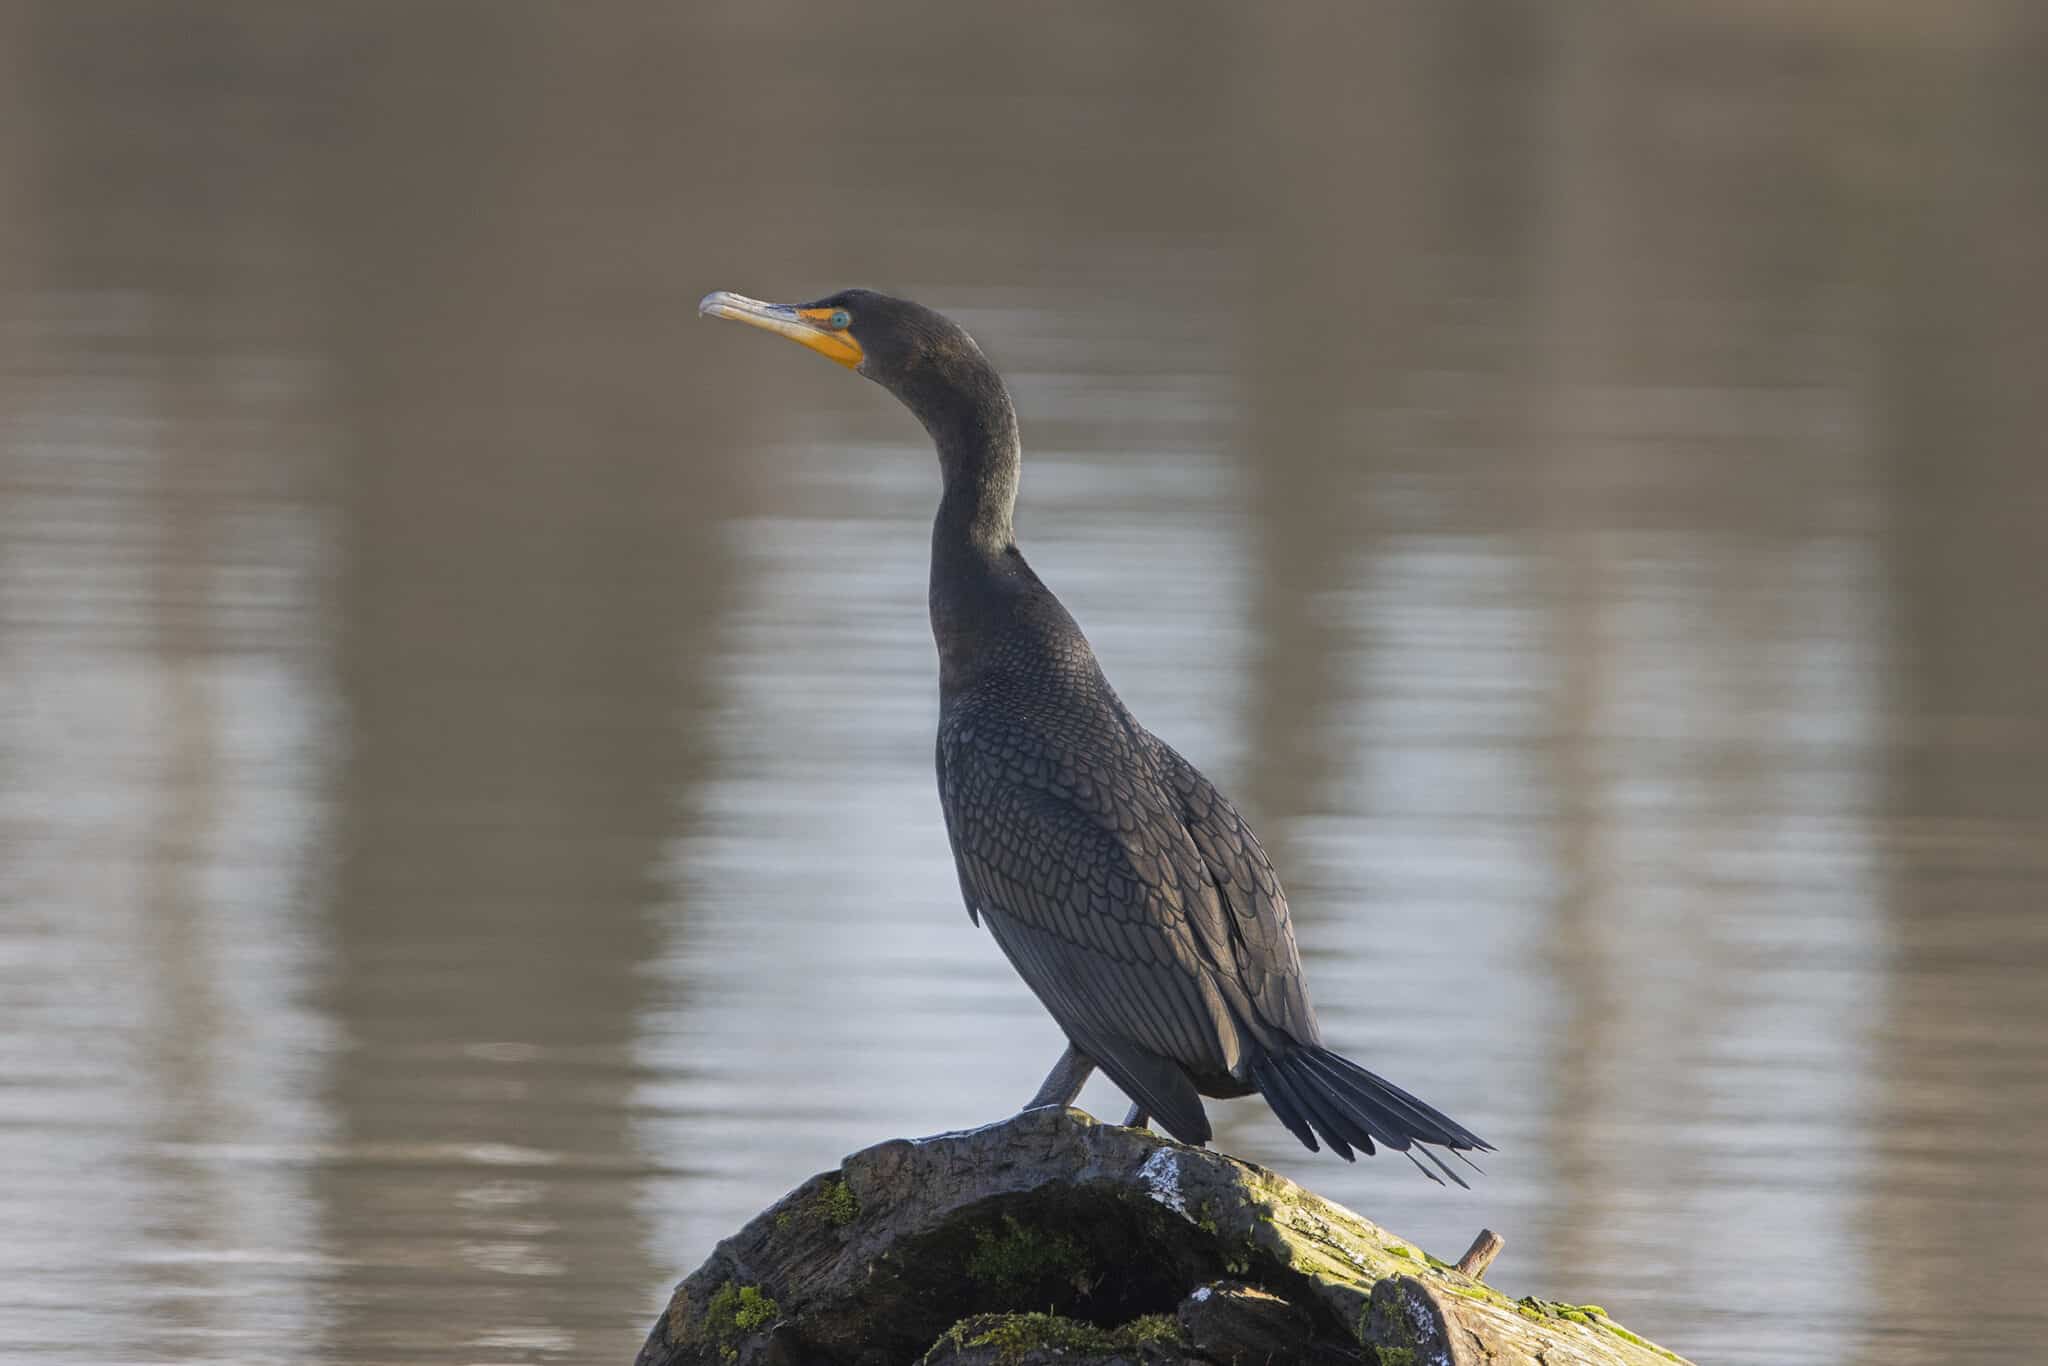 Double-Crested Cormorant, January 22, 2022